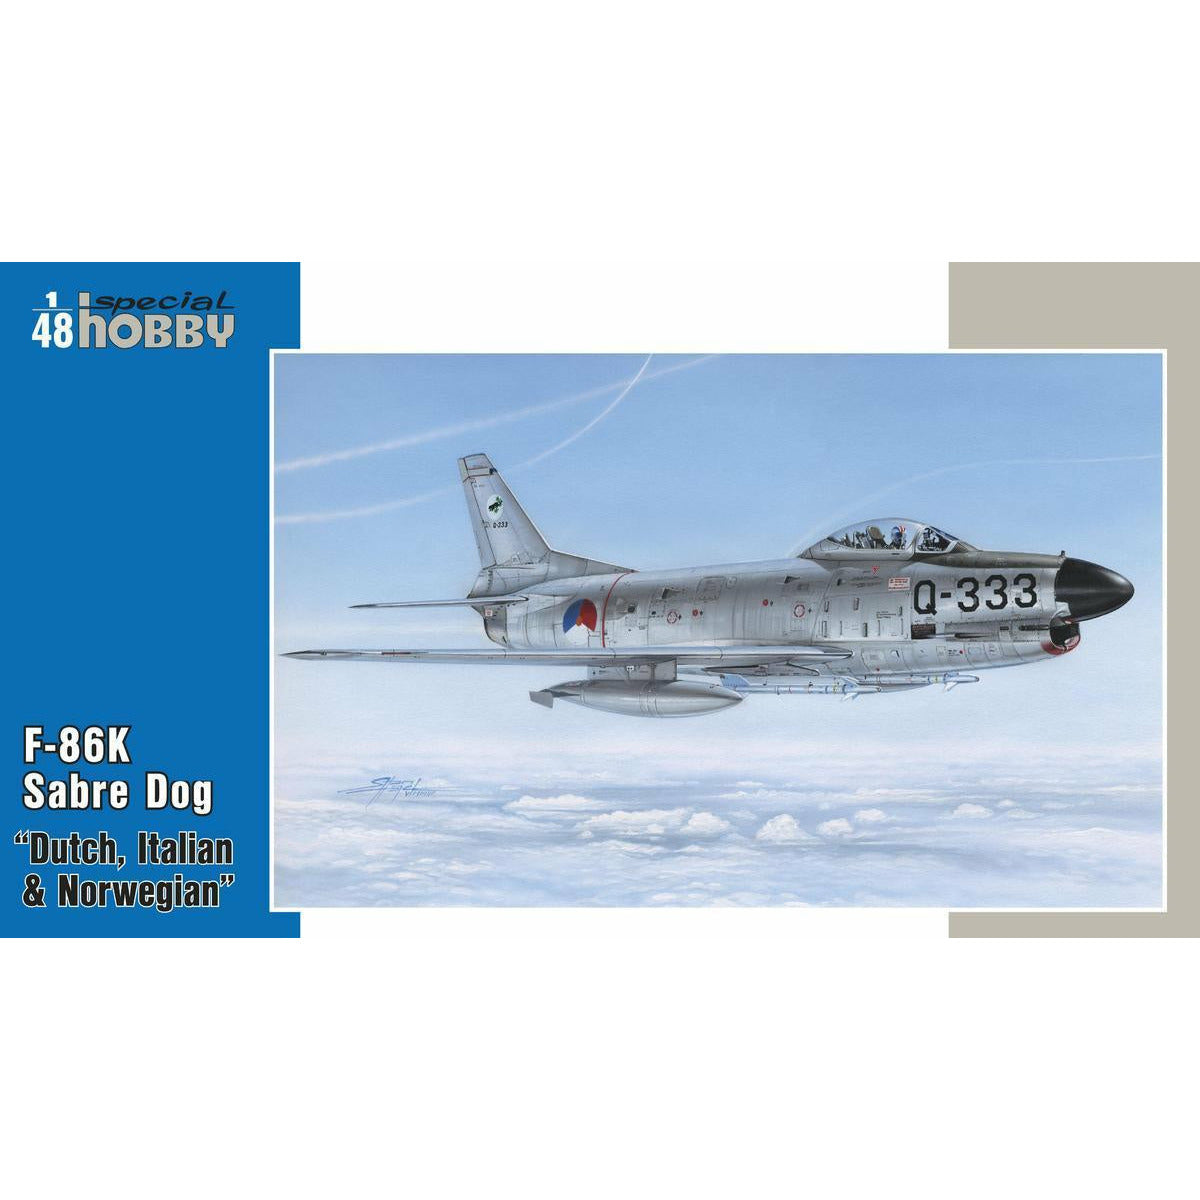 F-86K NATO All Weather Fighter 1/48 #SH48123 by Special Hobby